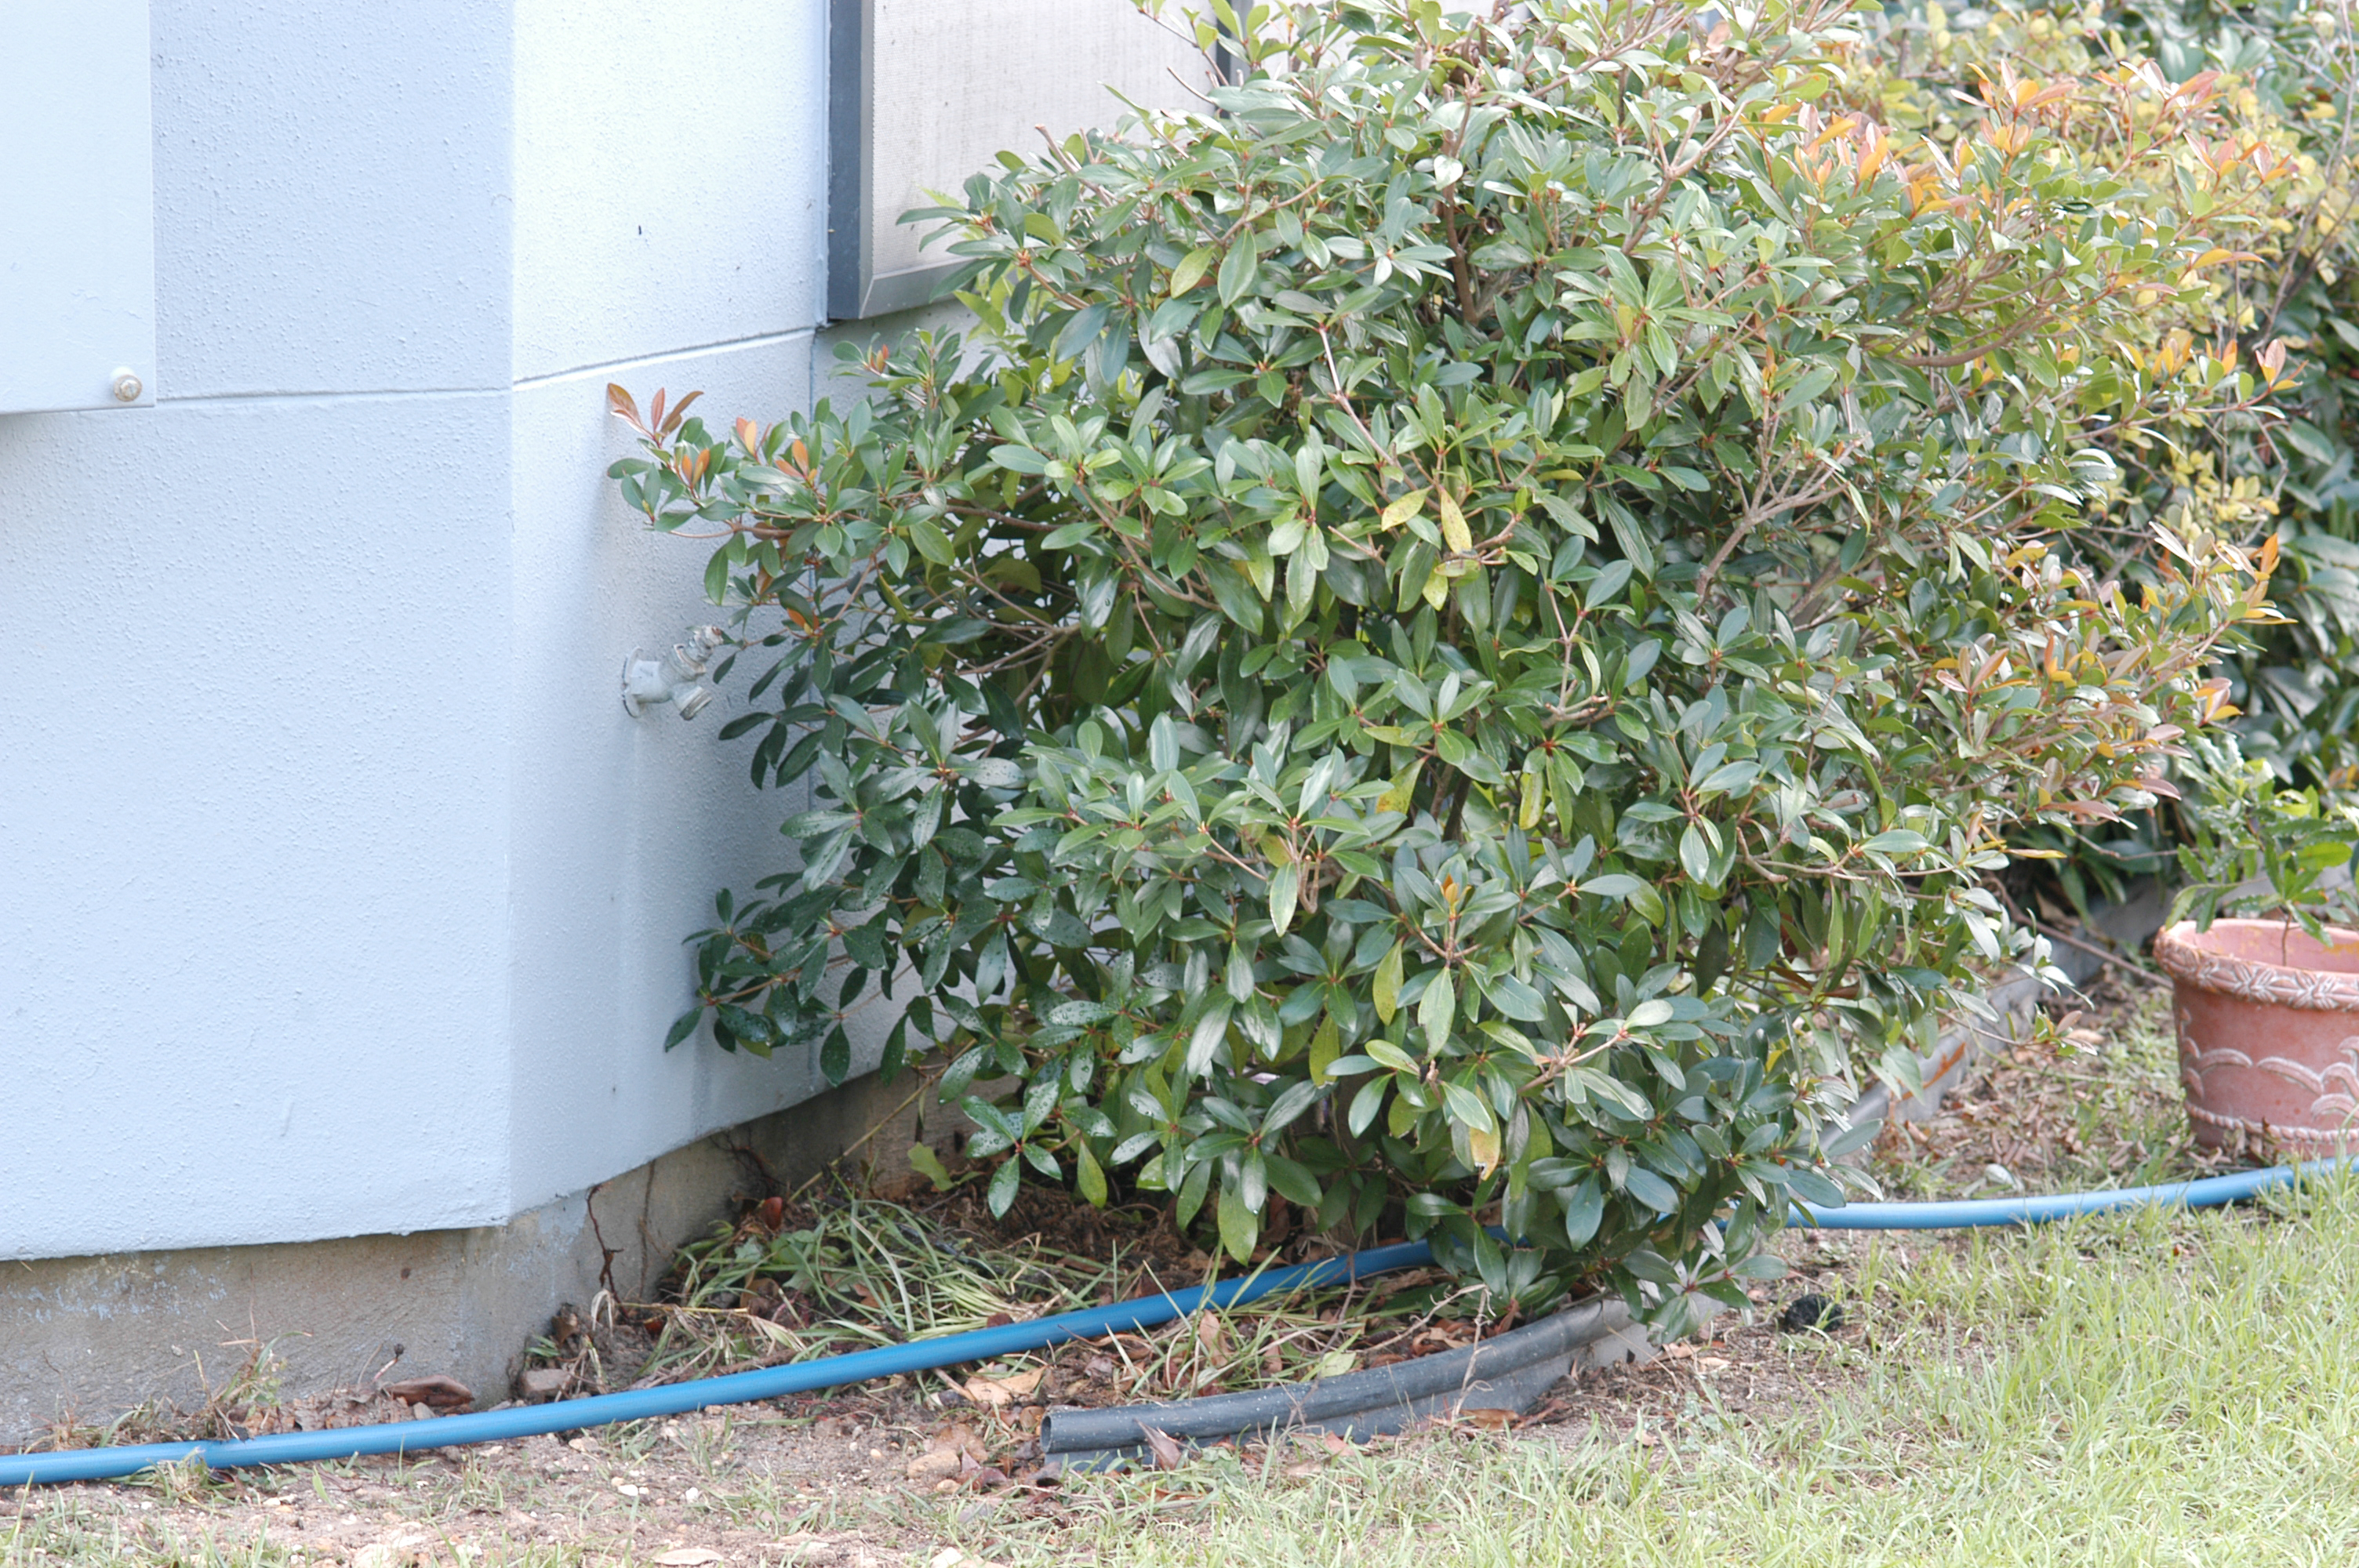 Foundation plantings that are too close to the building increase the potential for termite infestation and make inspection more difficult.  On the positive side, this building has good spacing between the soil surface and the lower edge of siding.